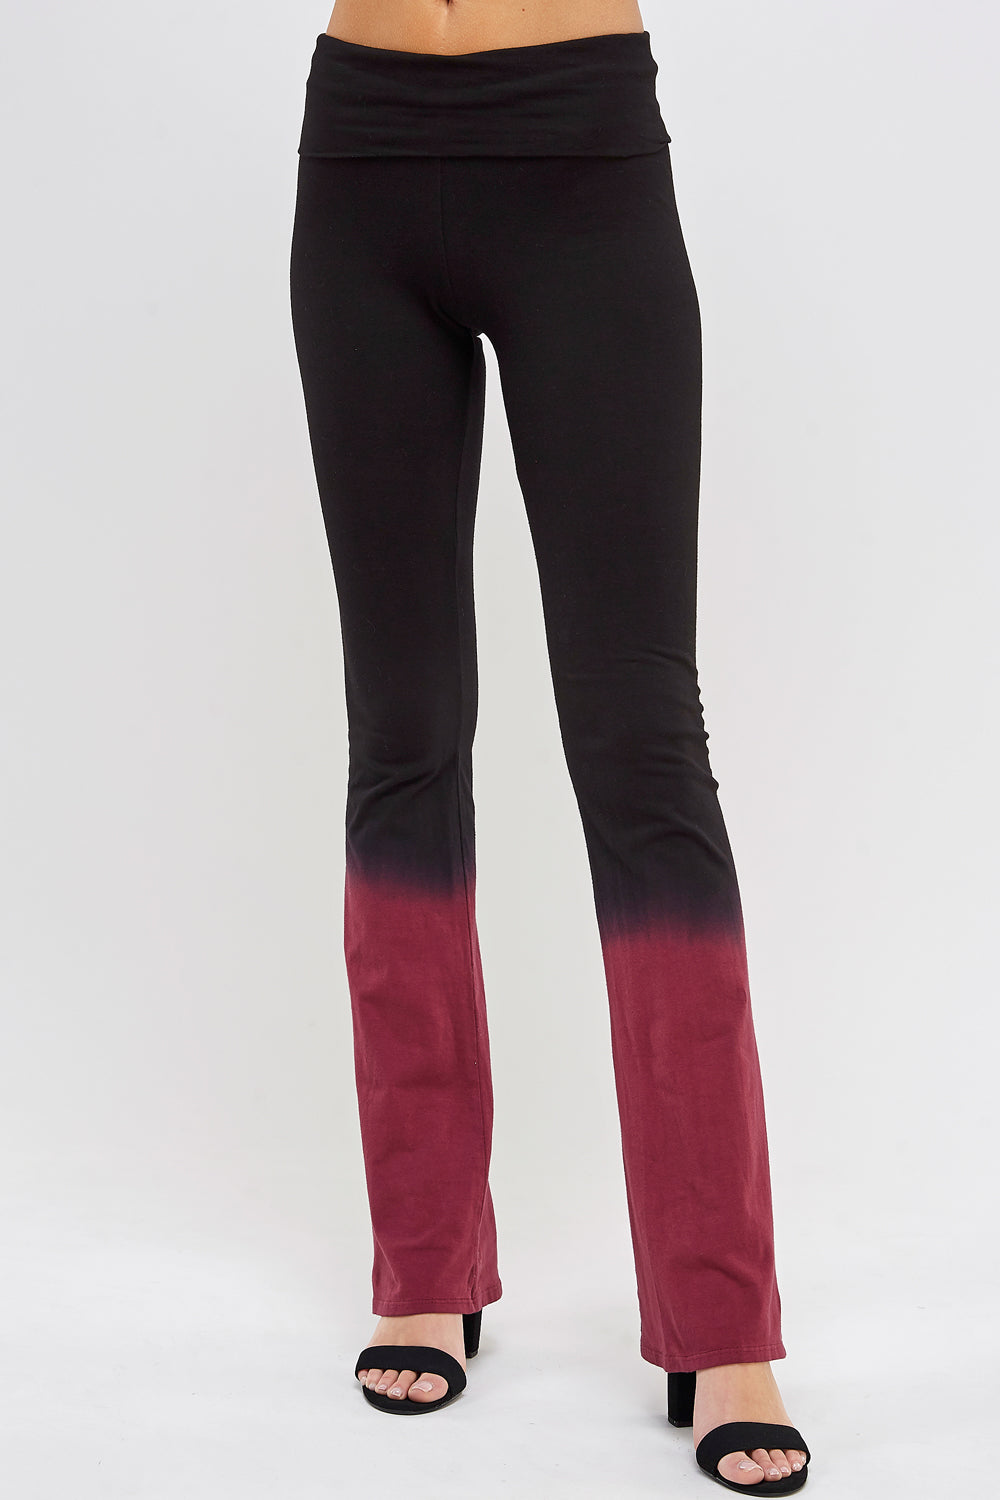 Front Side yoga pants Black and Magenta Dip Ombre tie dye